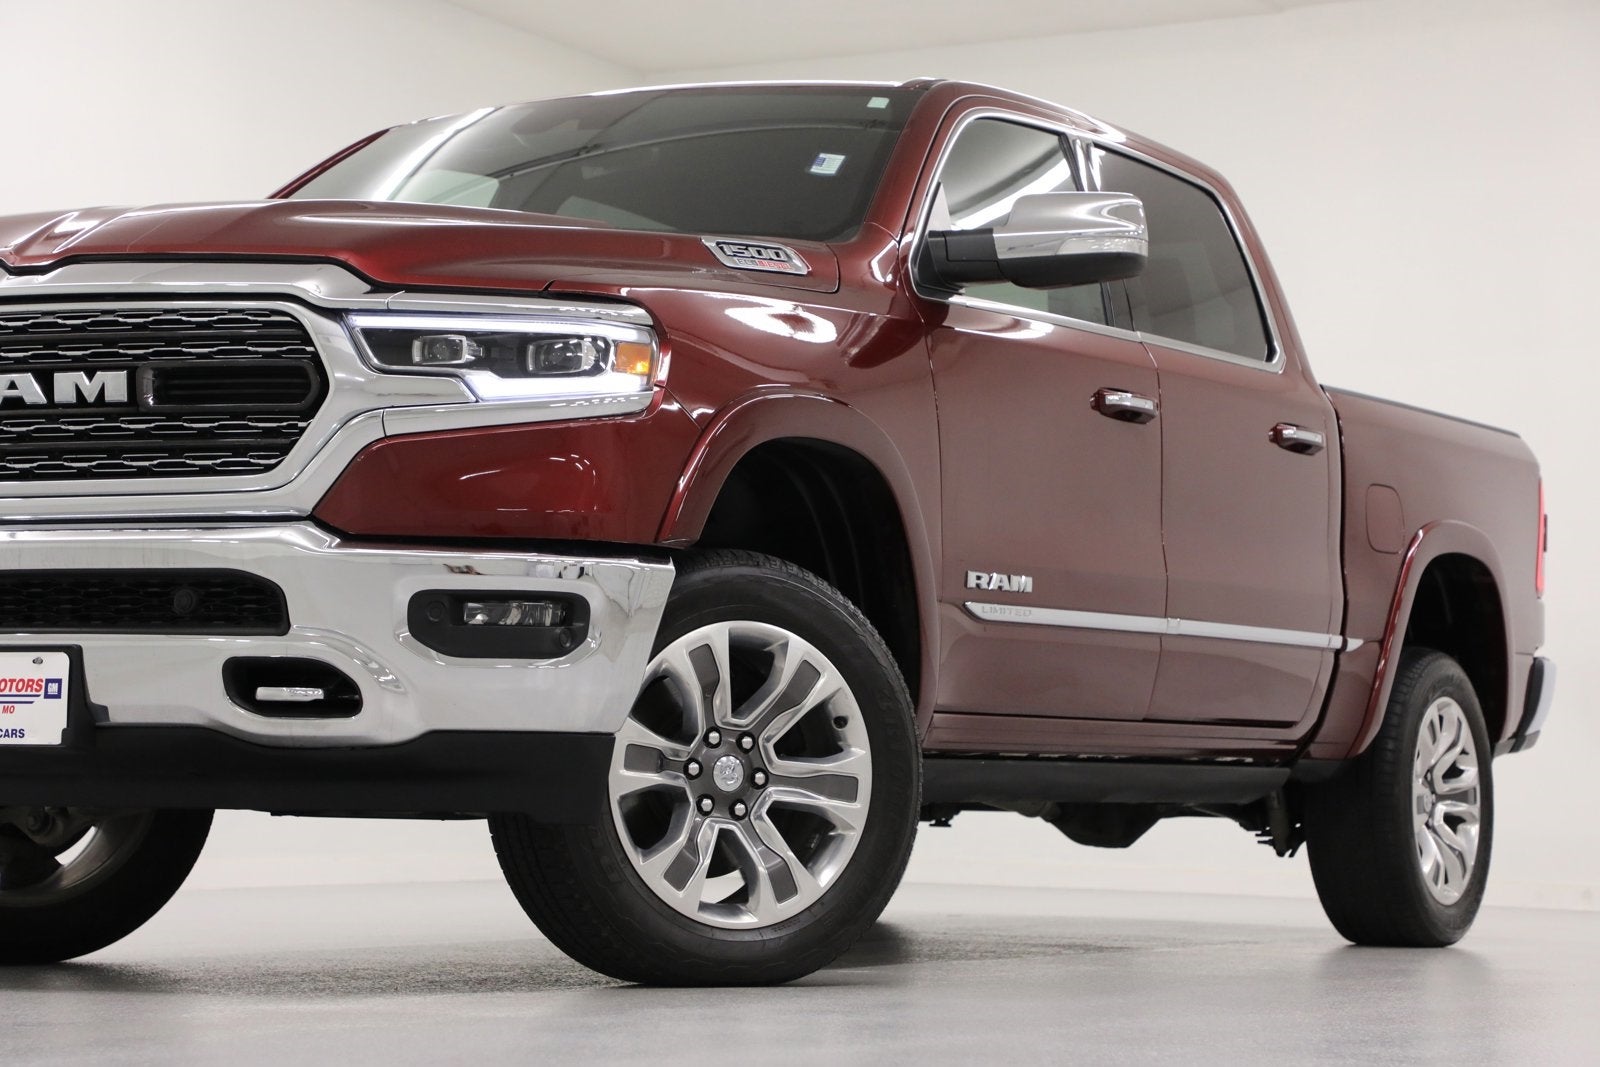 2022 RAM 1500 Crew Cab Limited 4WD Heated Cooled Leather Memory Remote Start 20 Inch Wheels HD Camera Intellibeam